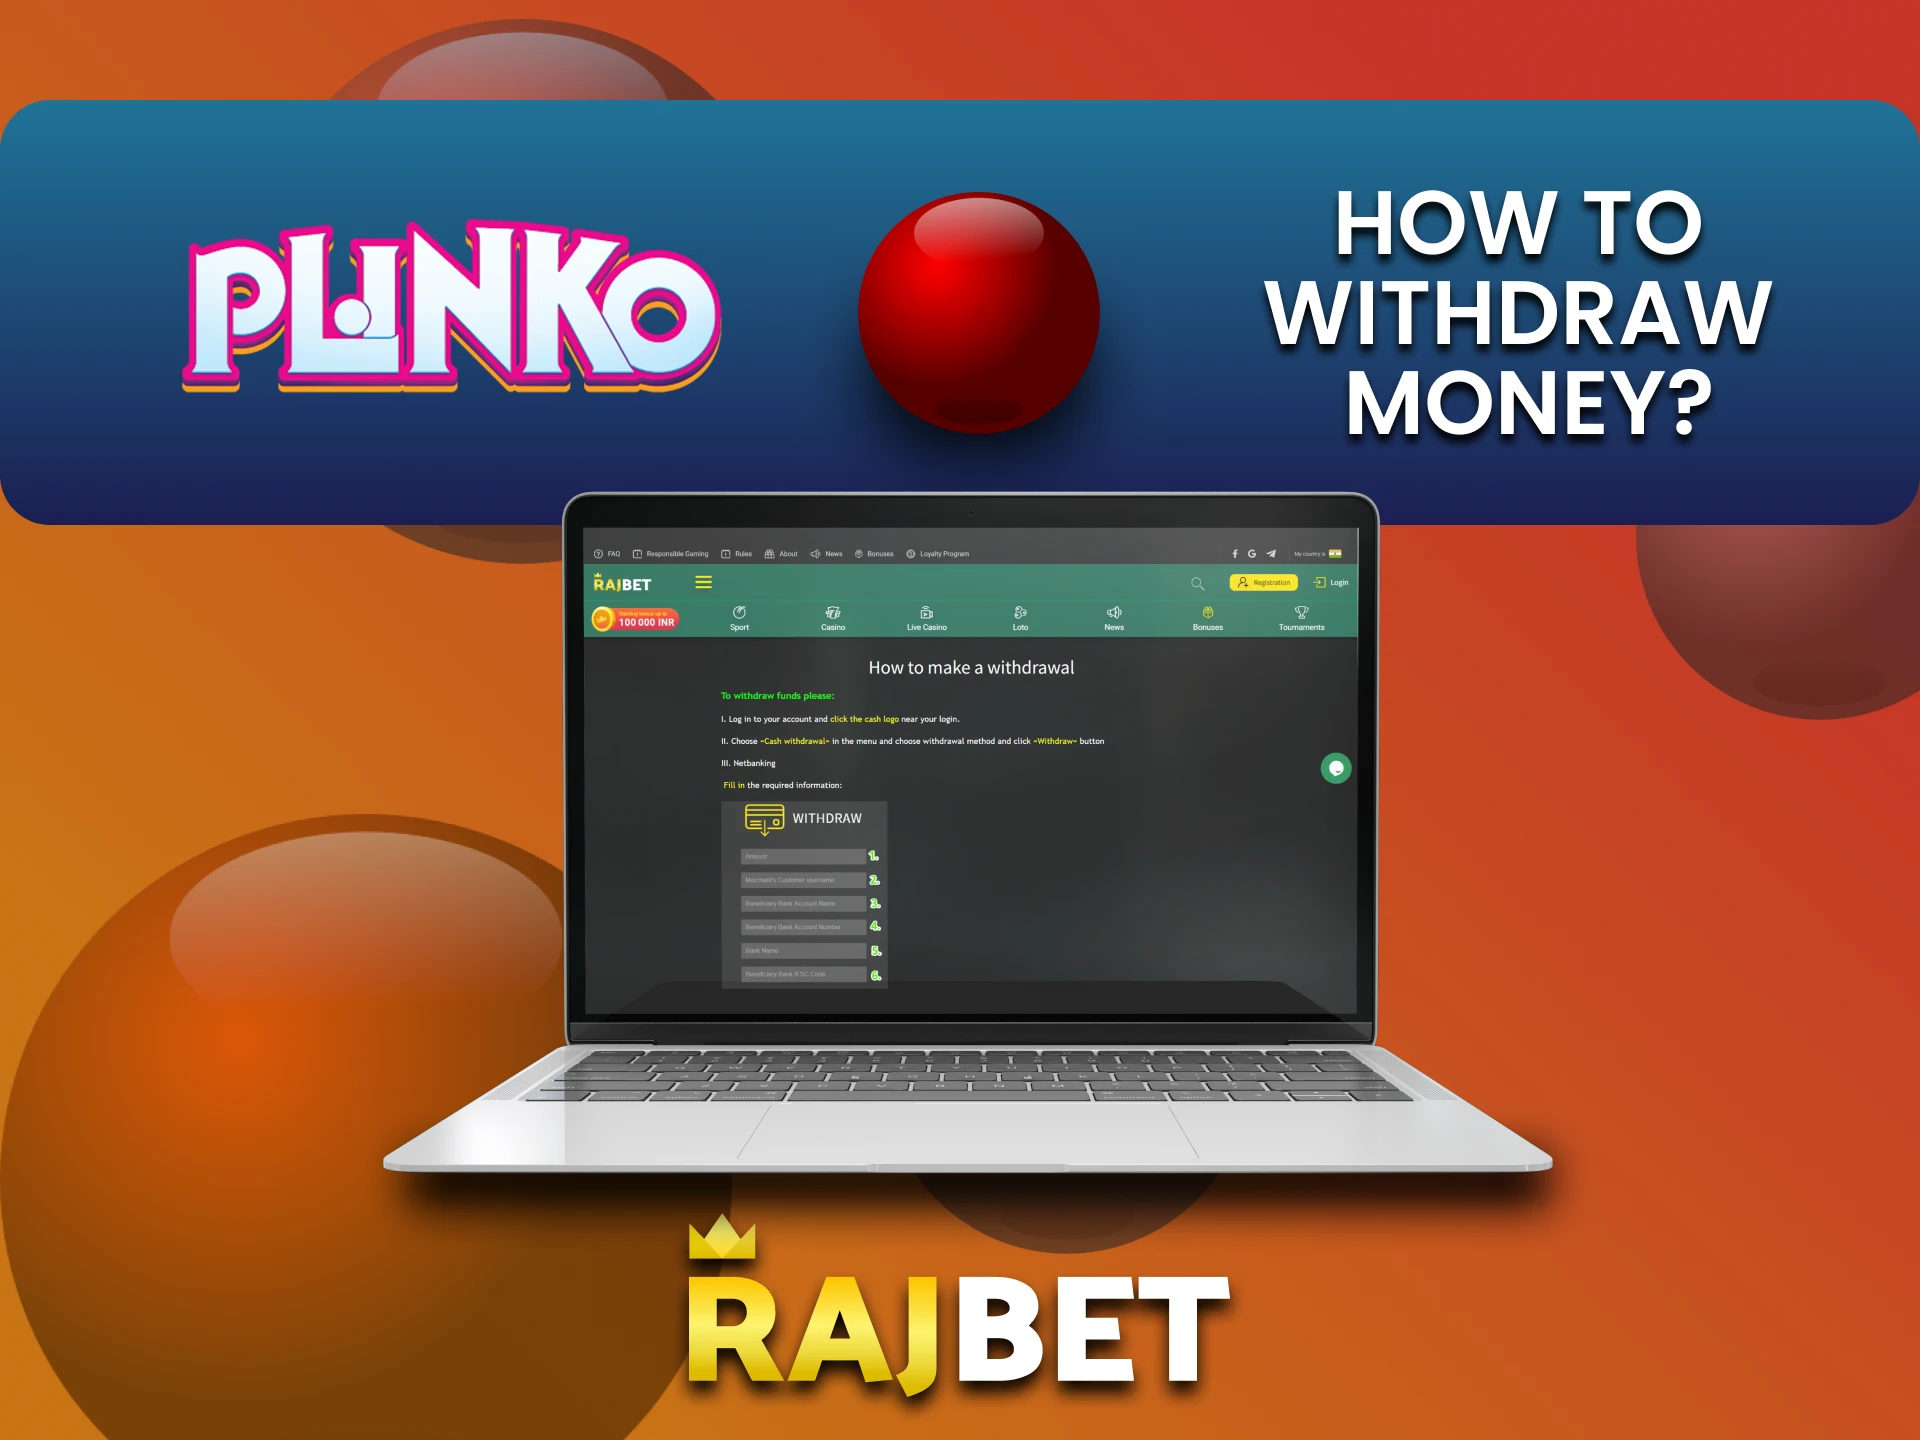 Find out how to withdraw funds for Plinko on Rajbet.